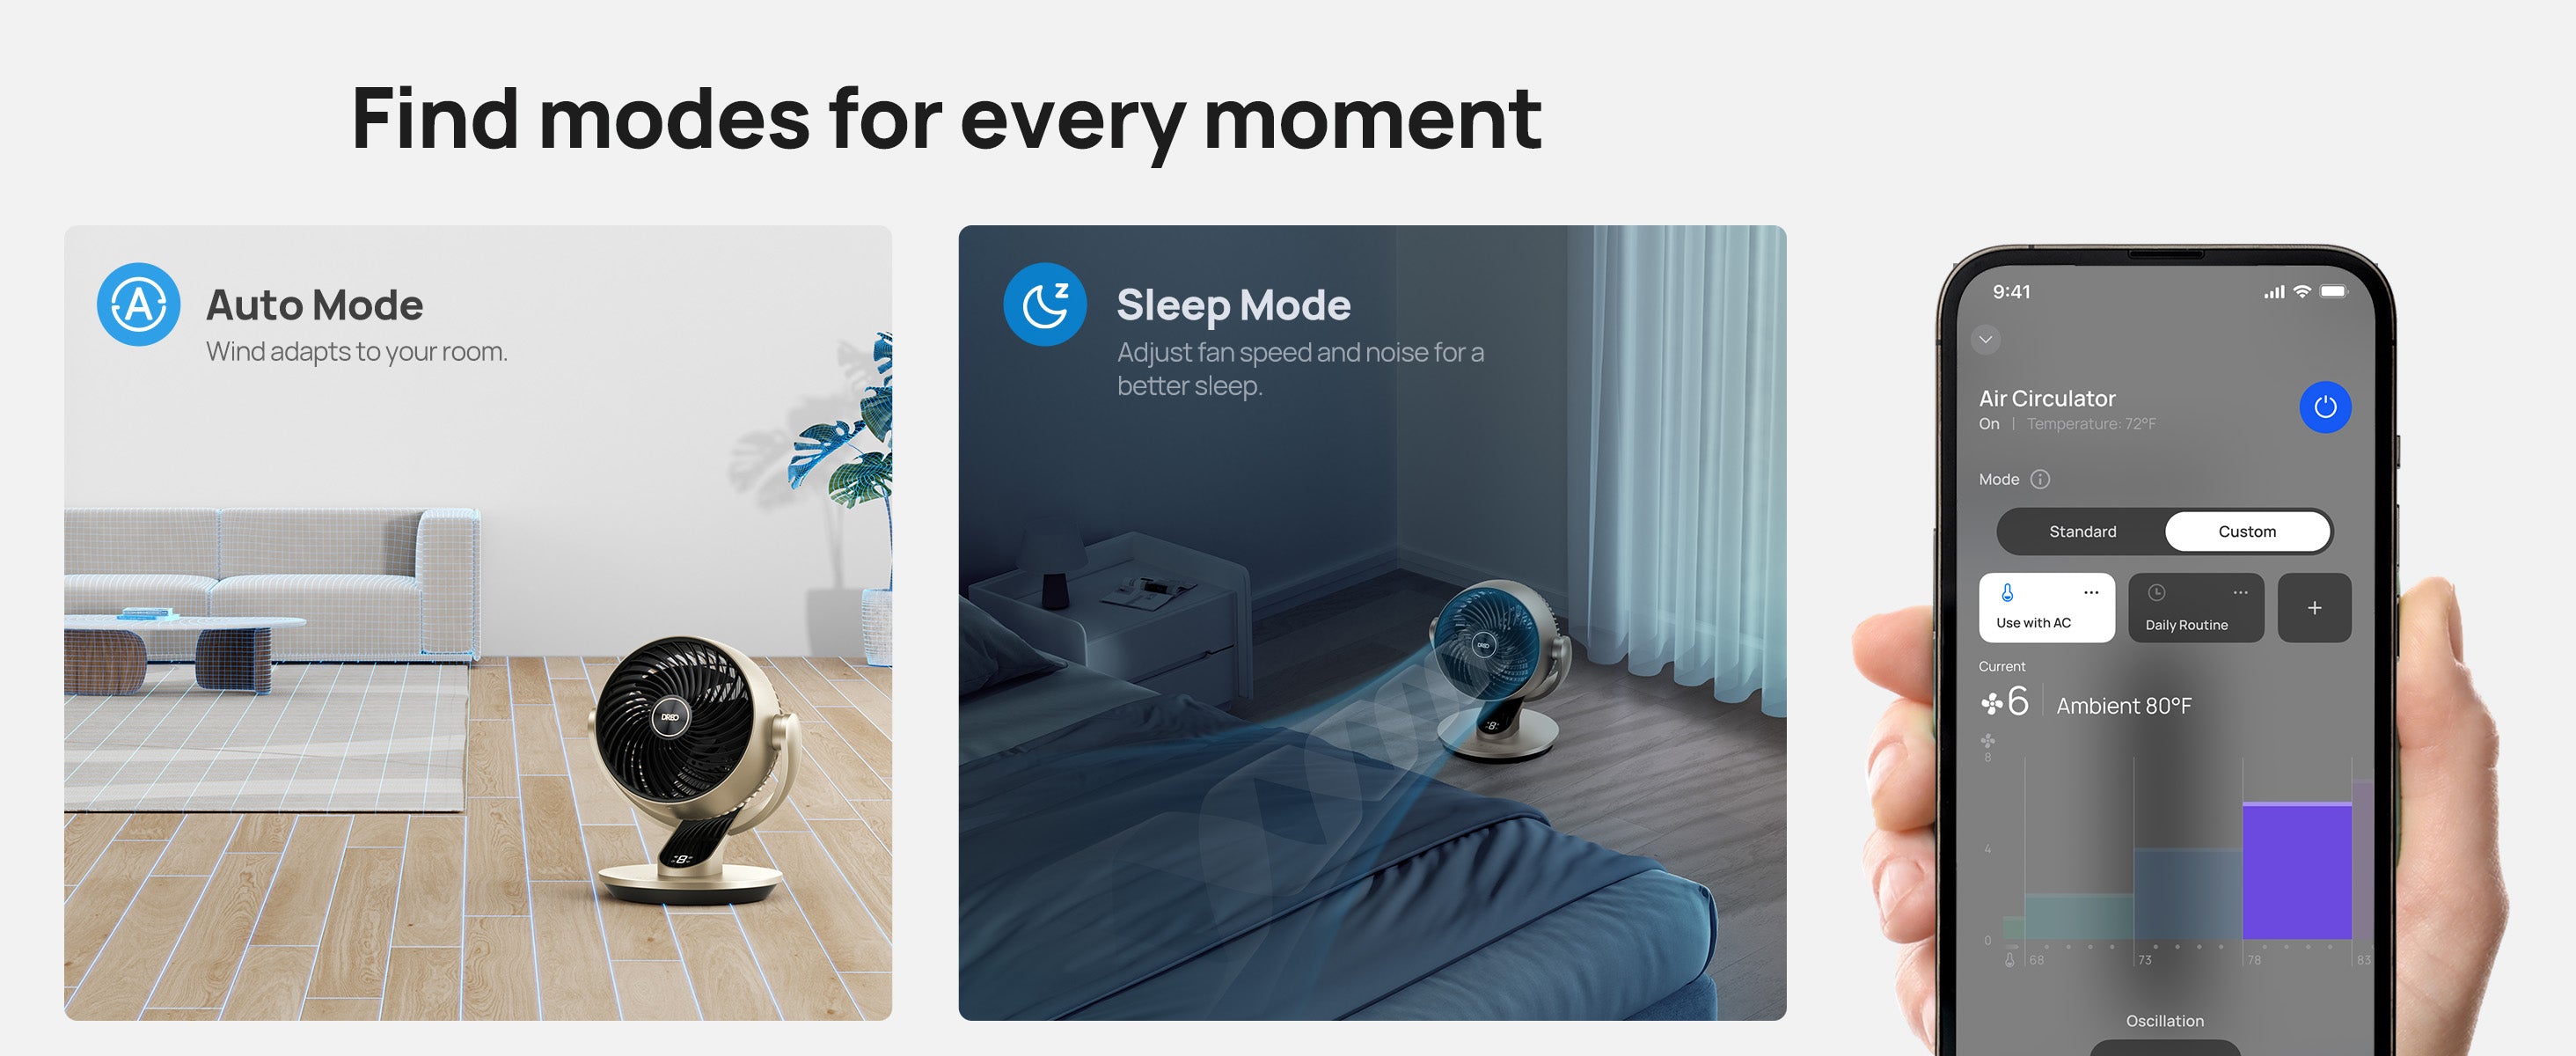 Find modes for every moment